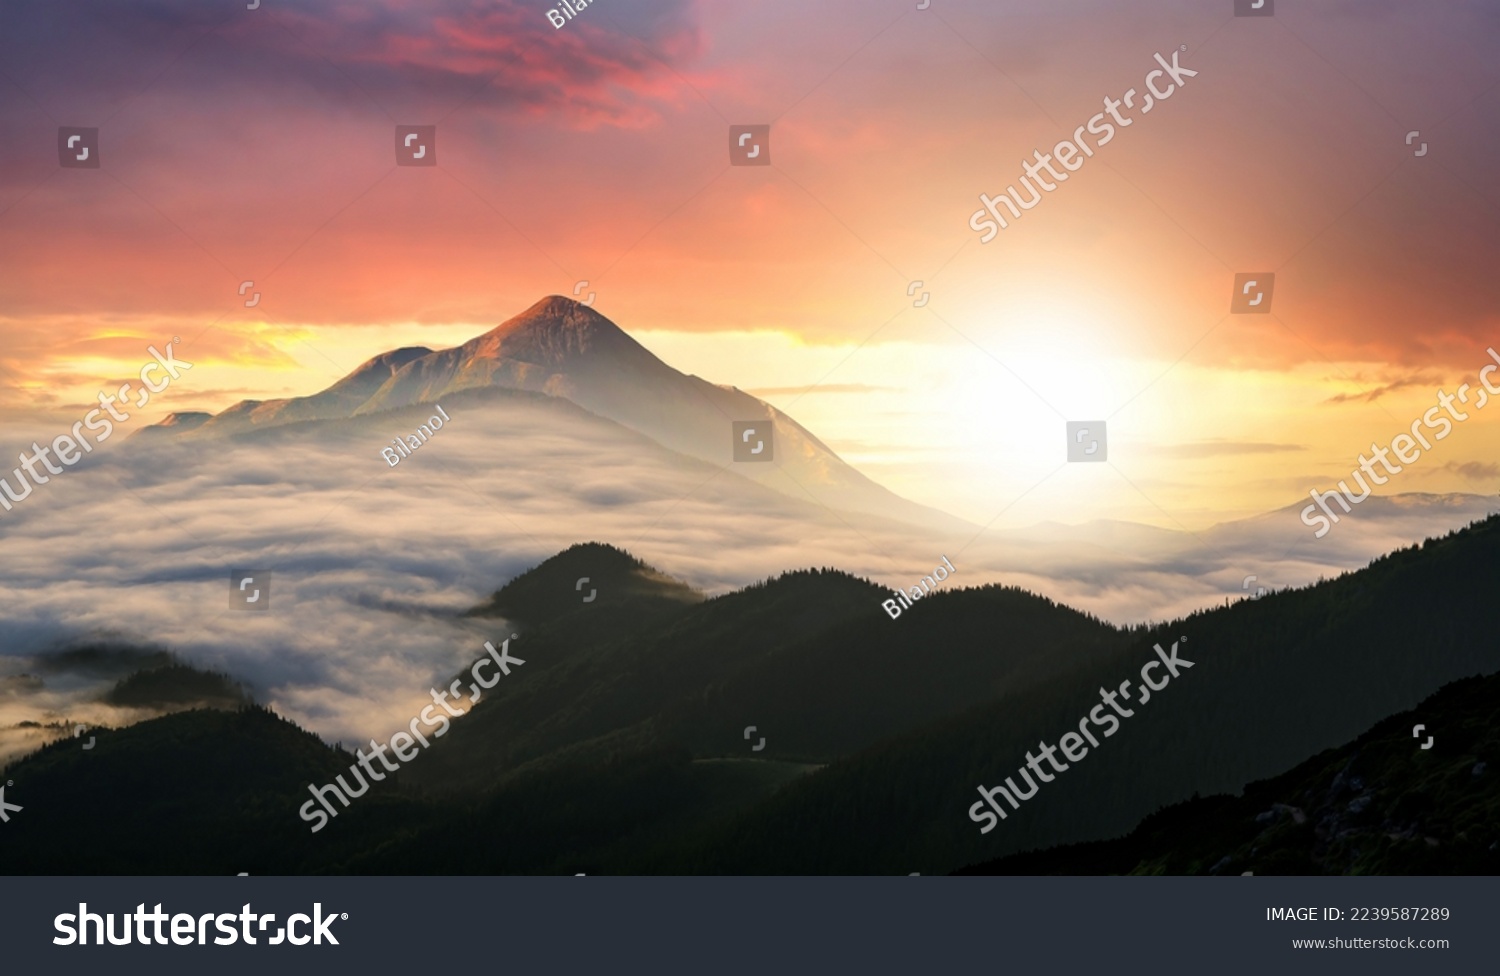 Sunset landscape with high peaks and foggy valley with thick white clouds under vibrant colorful evening sky in rocky mountains. #2239587289